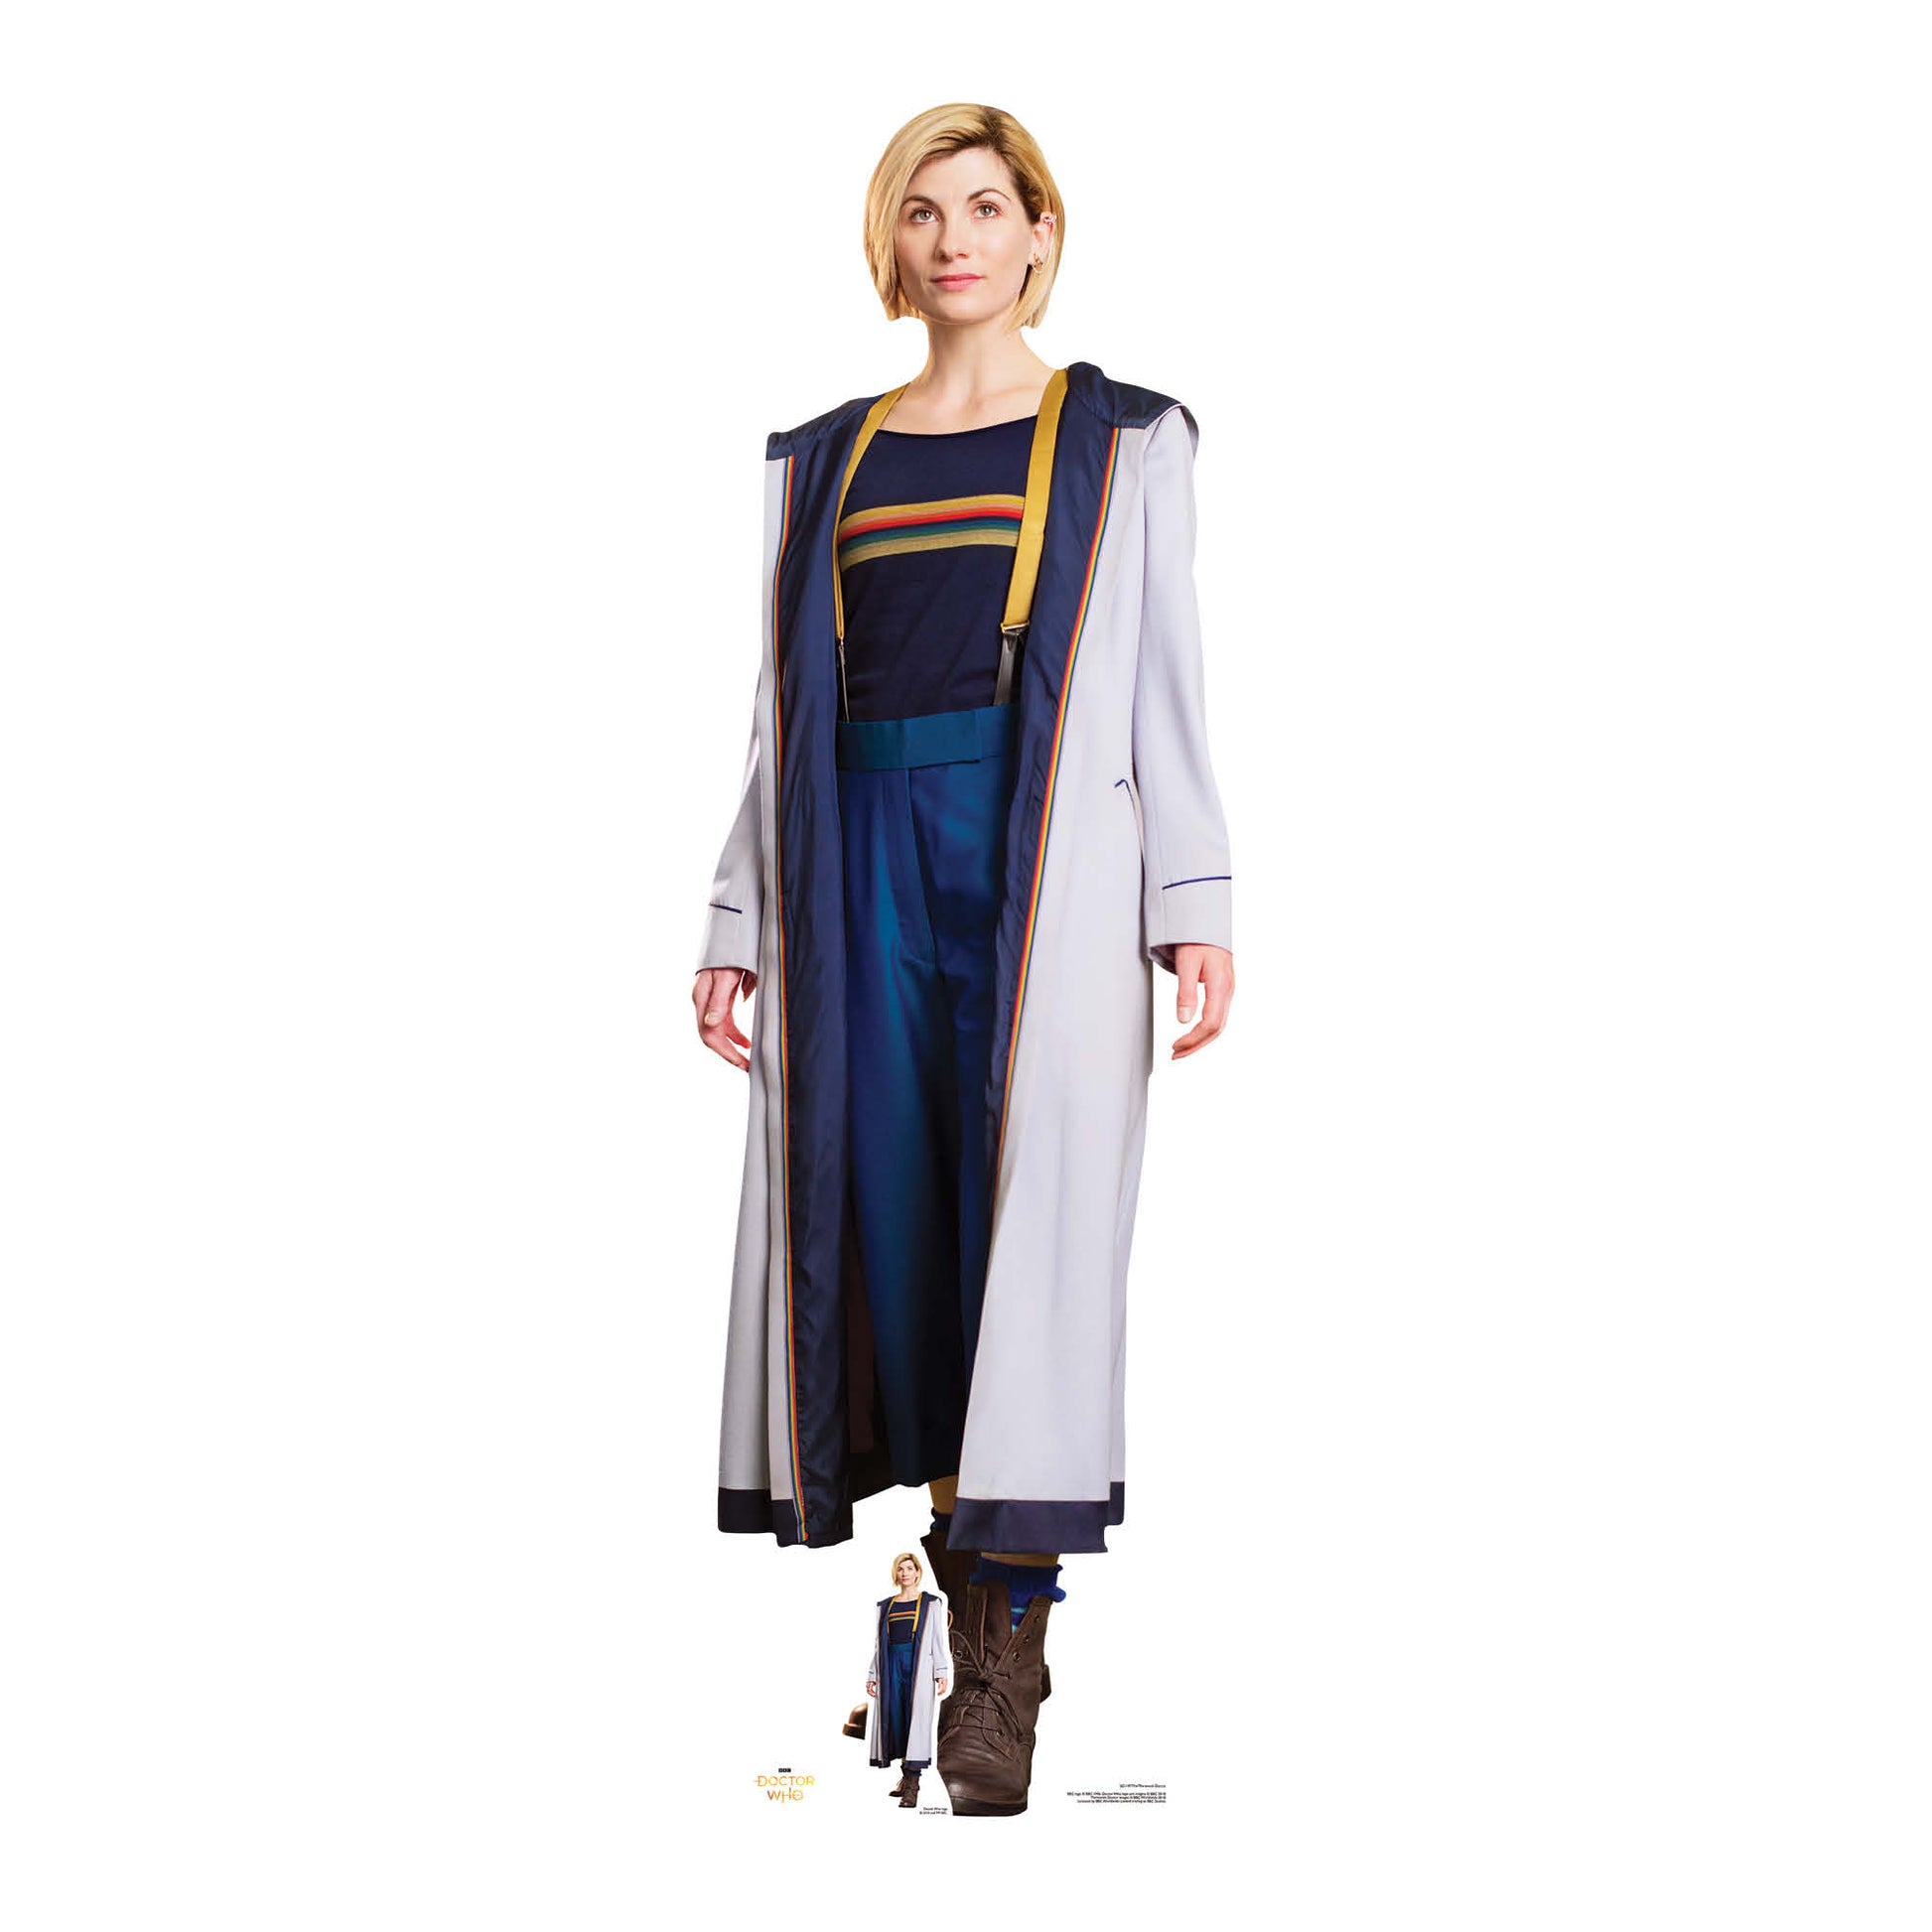 Jodie Whittaker 13th Doctor Lifesize   Doctor Who Cardboard Cut Out Height 168cm - Star Cutouts